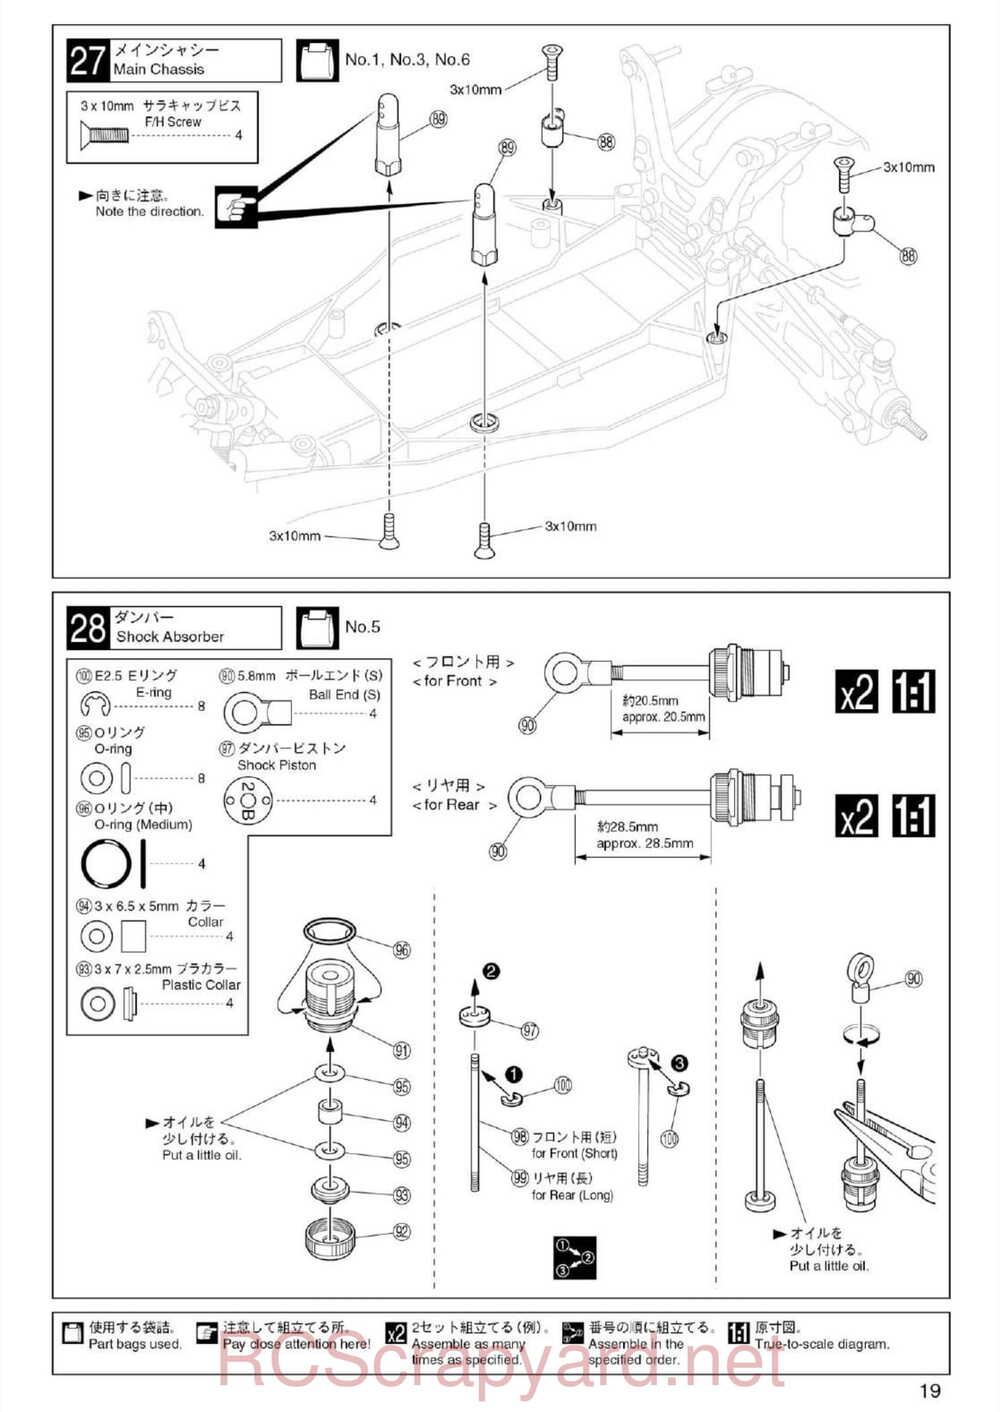 Kyosho - 30074 - Ultima-RB5 - Manual - Page 19